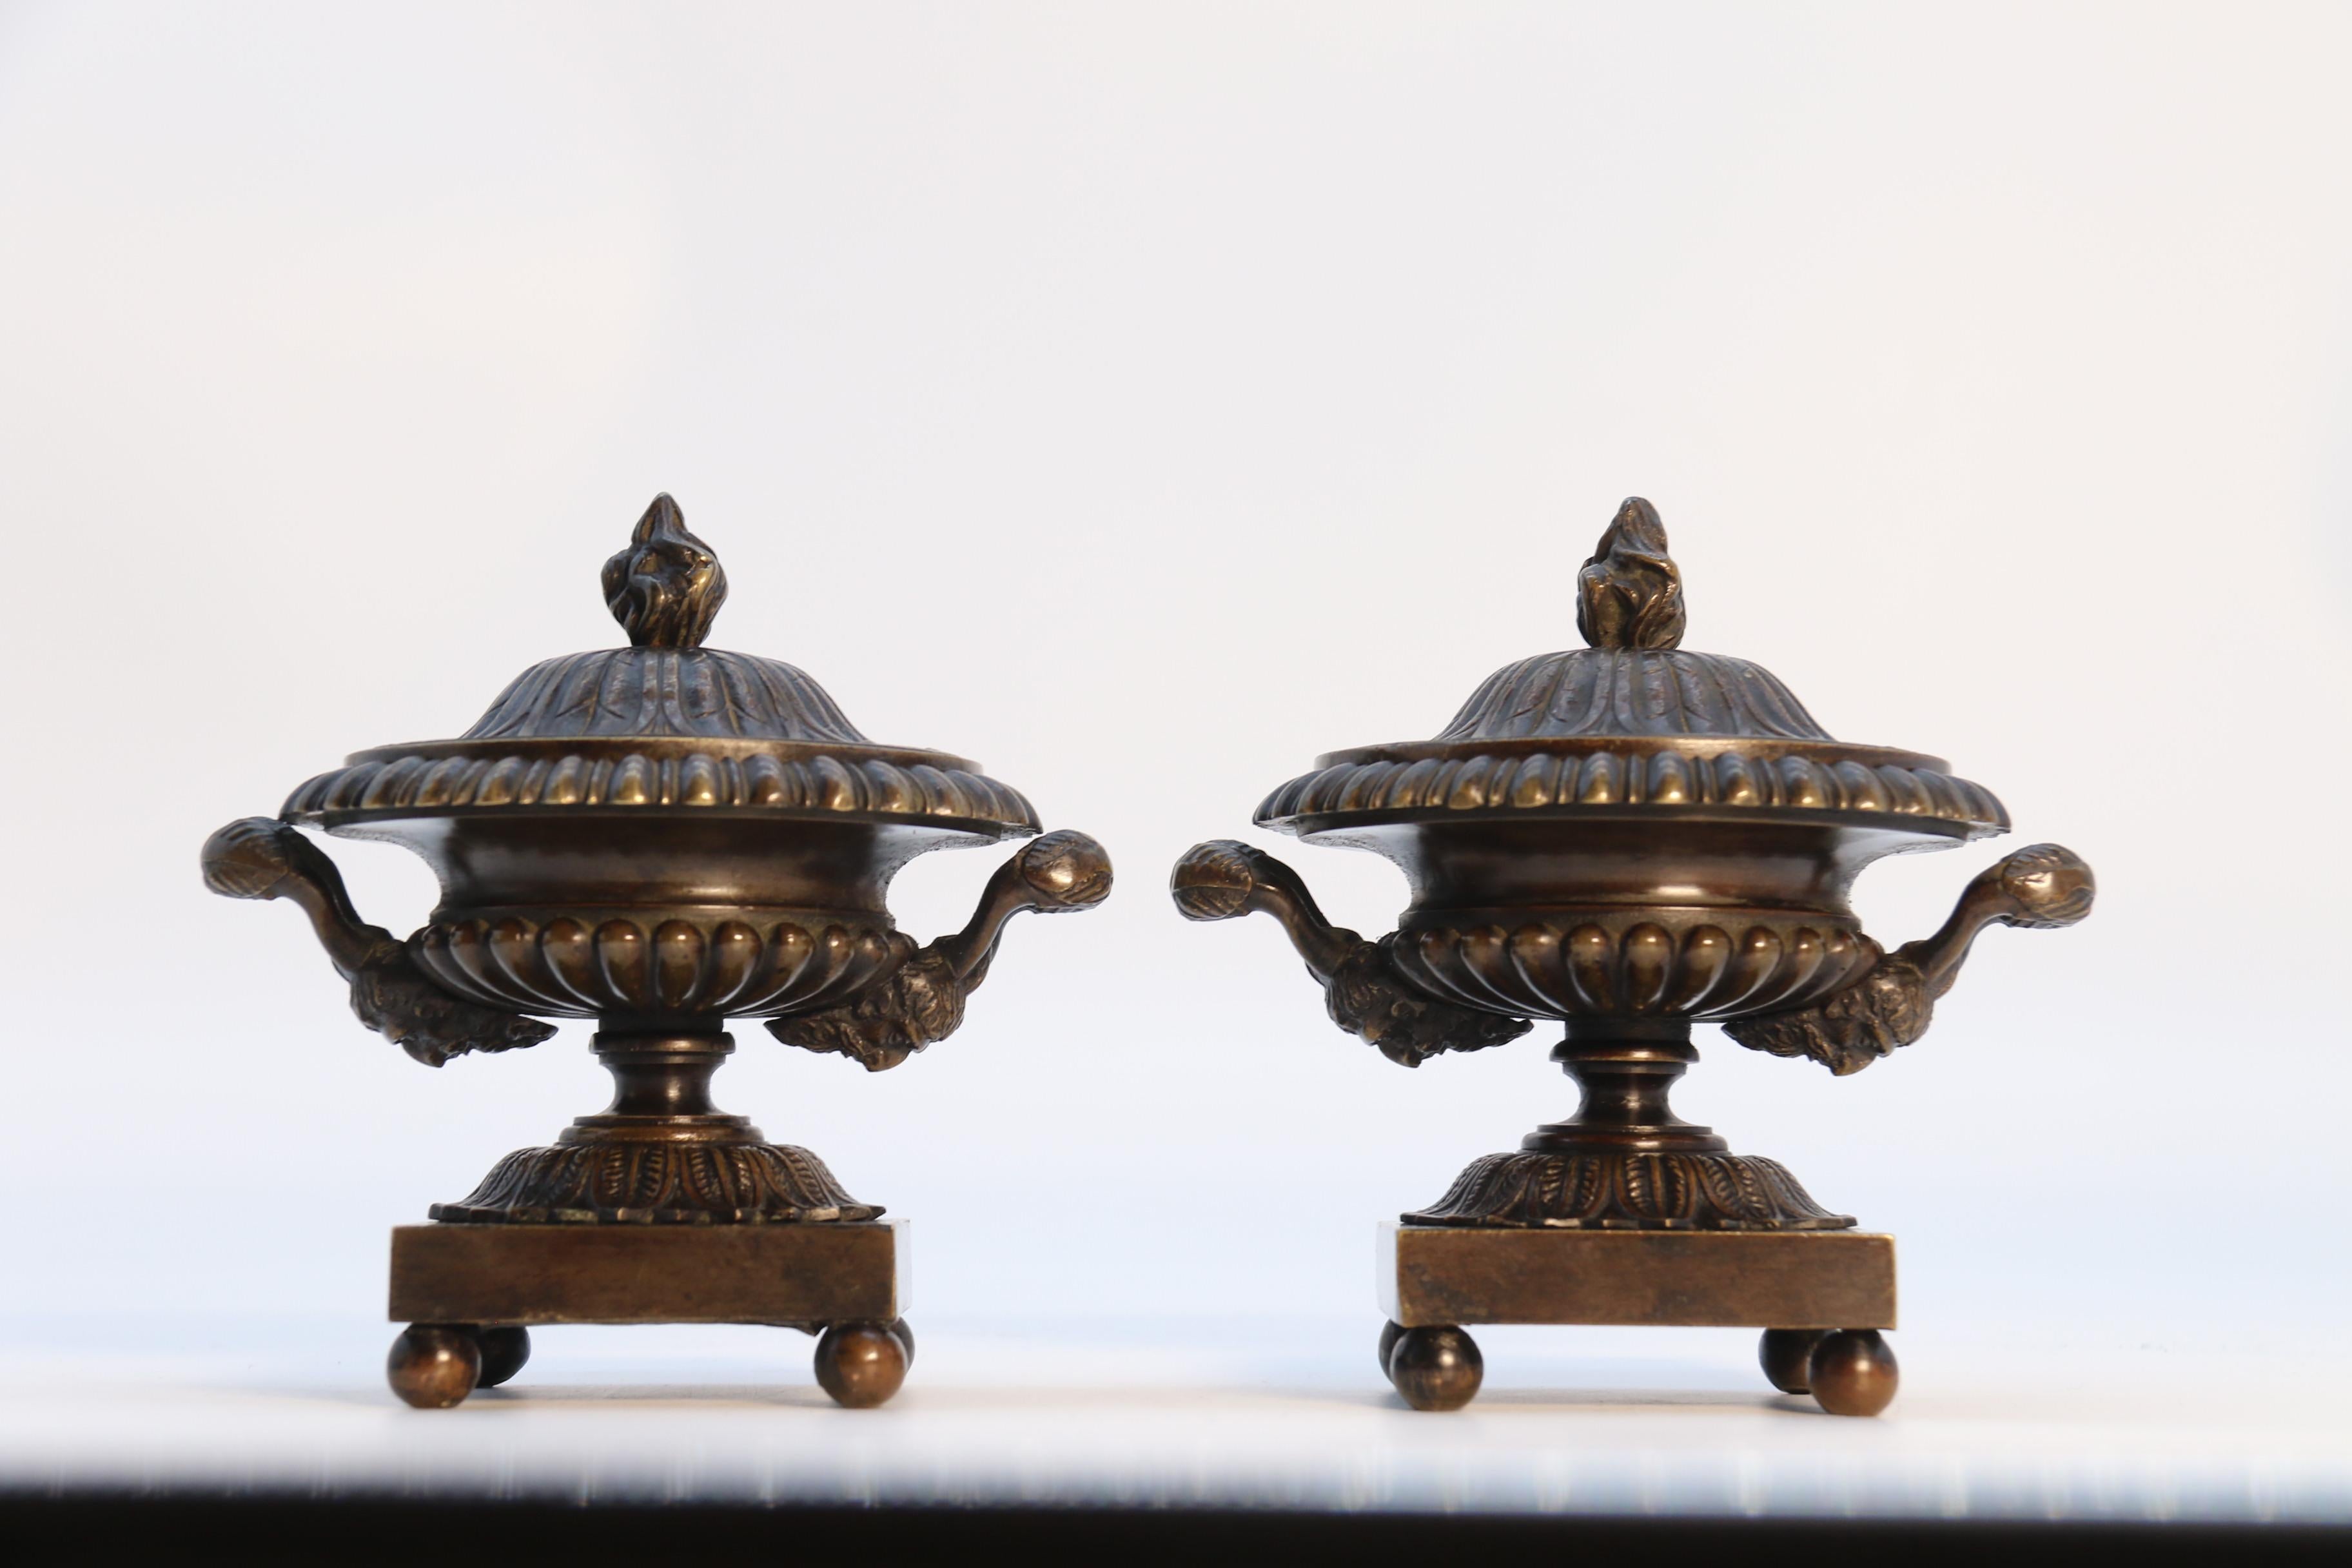 Antique  pair of English Regency period classical bronze urns,  circa 1820 For Sale 4